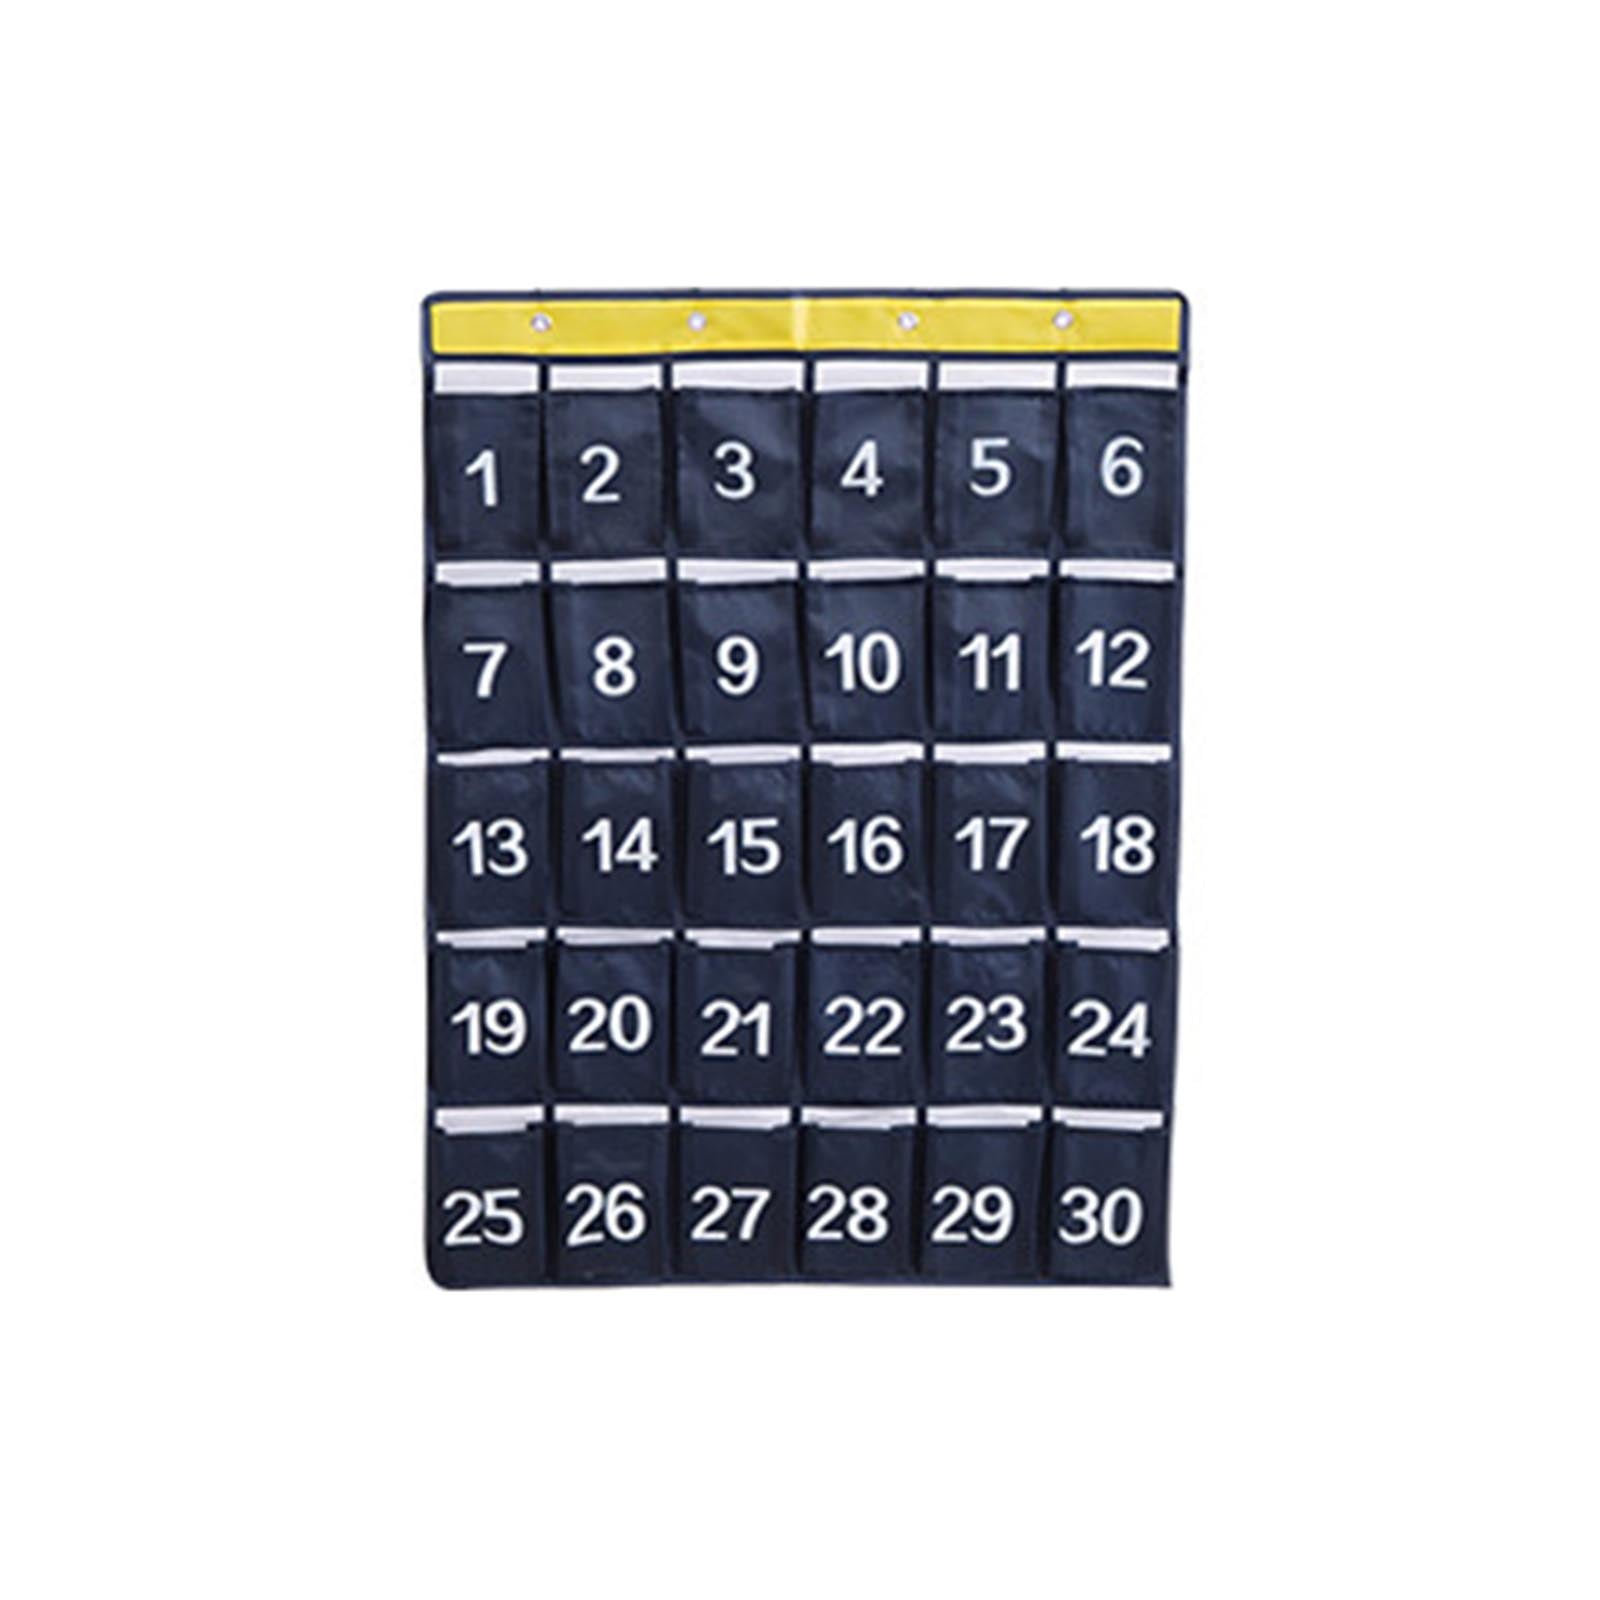 QIRG Cellphone Bag Wall Phone Bag with Numbers for Office